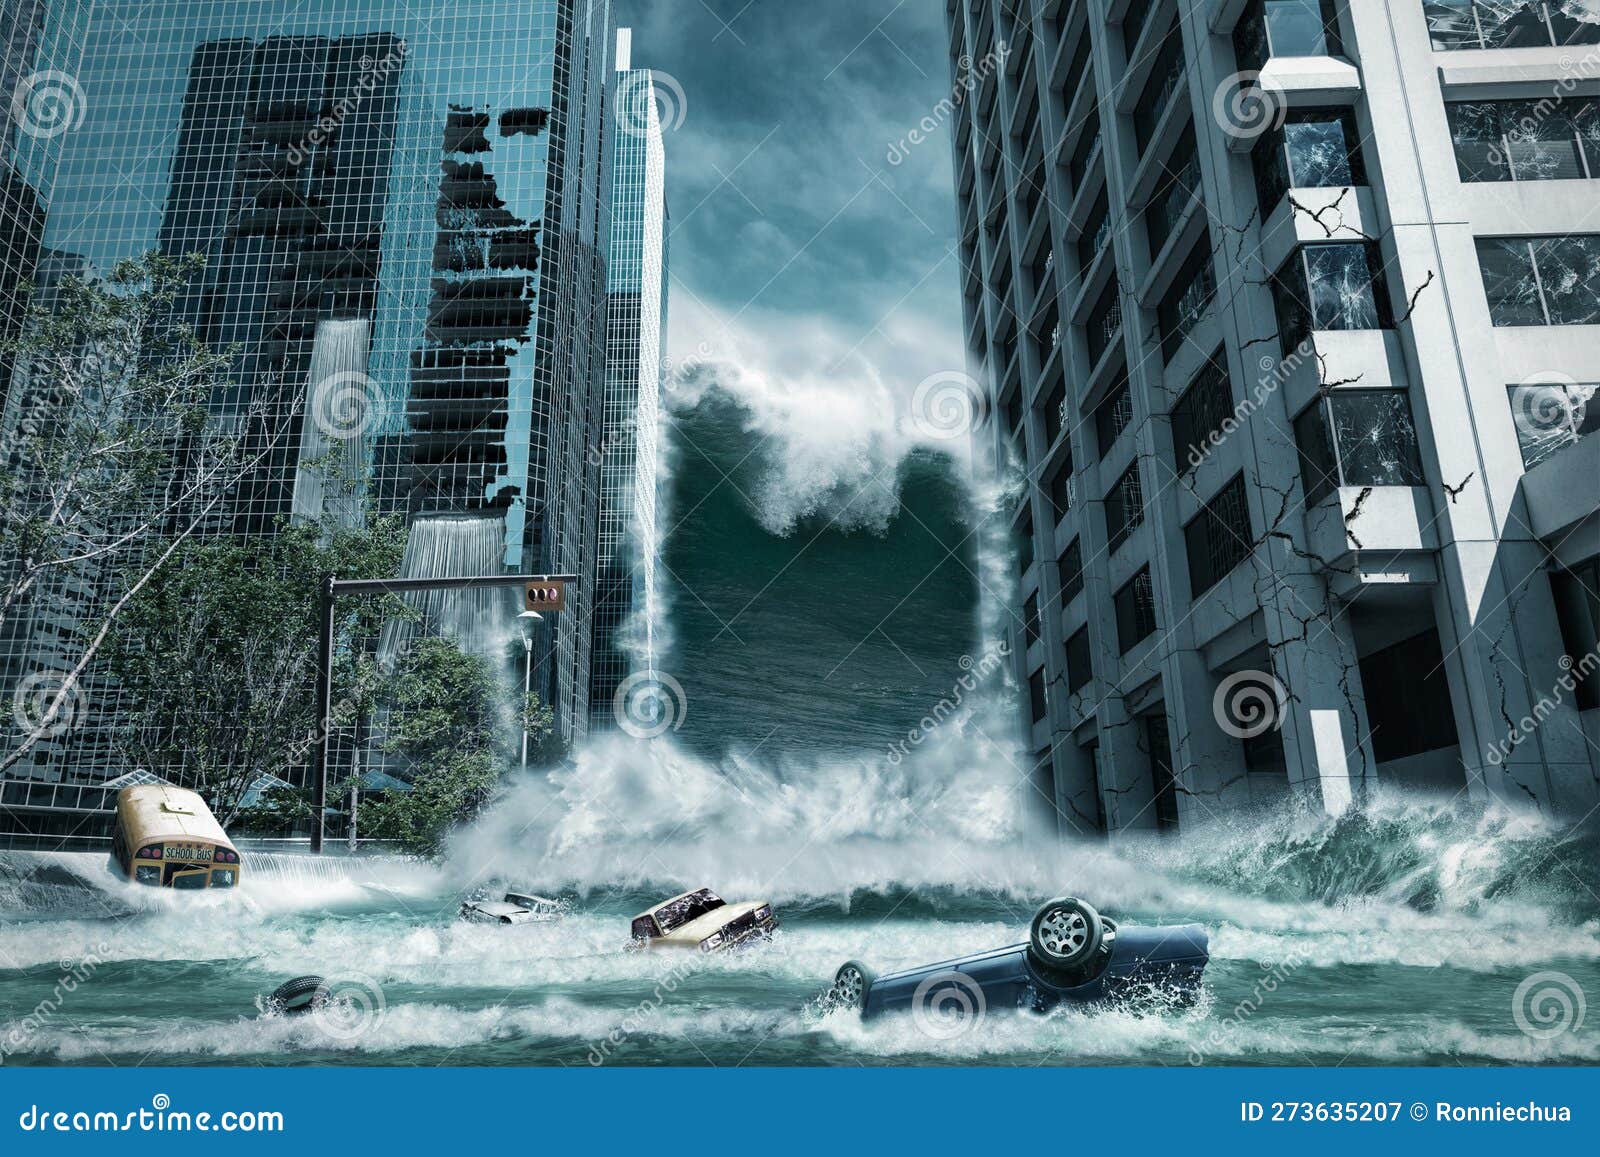 cinematic portrayal of a city destroyed by tsunami waves in a disaster. matte painting technique.